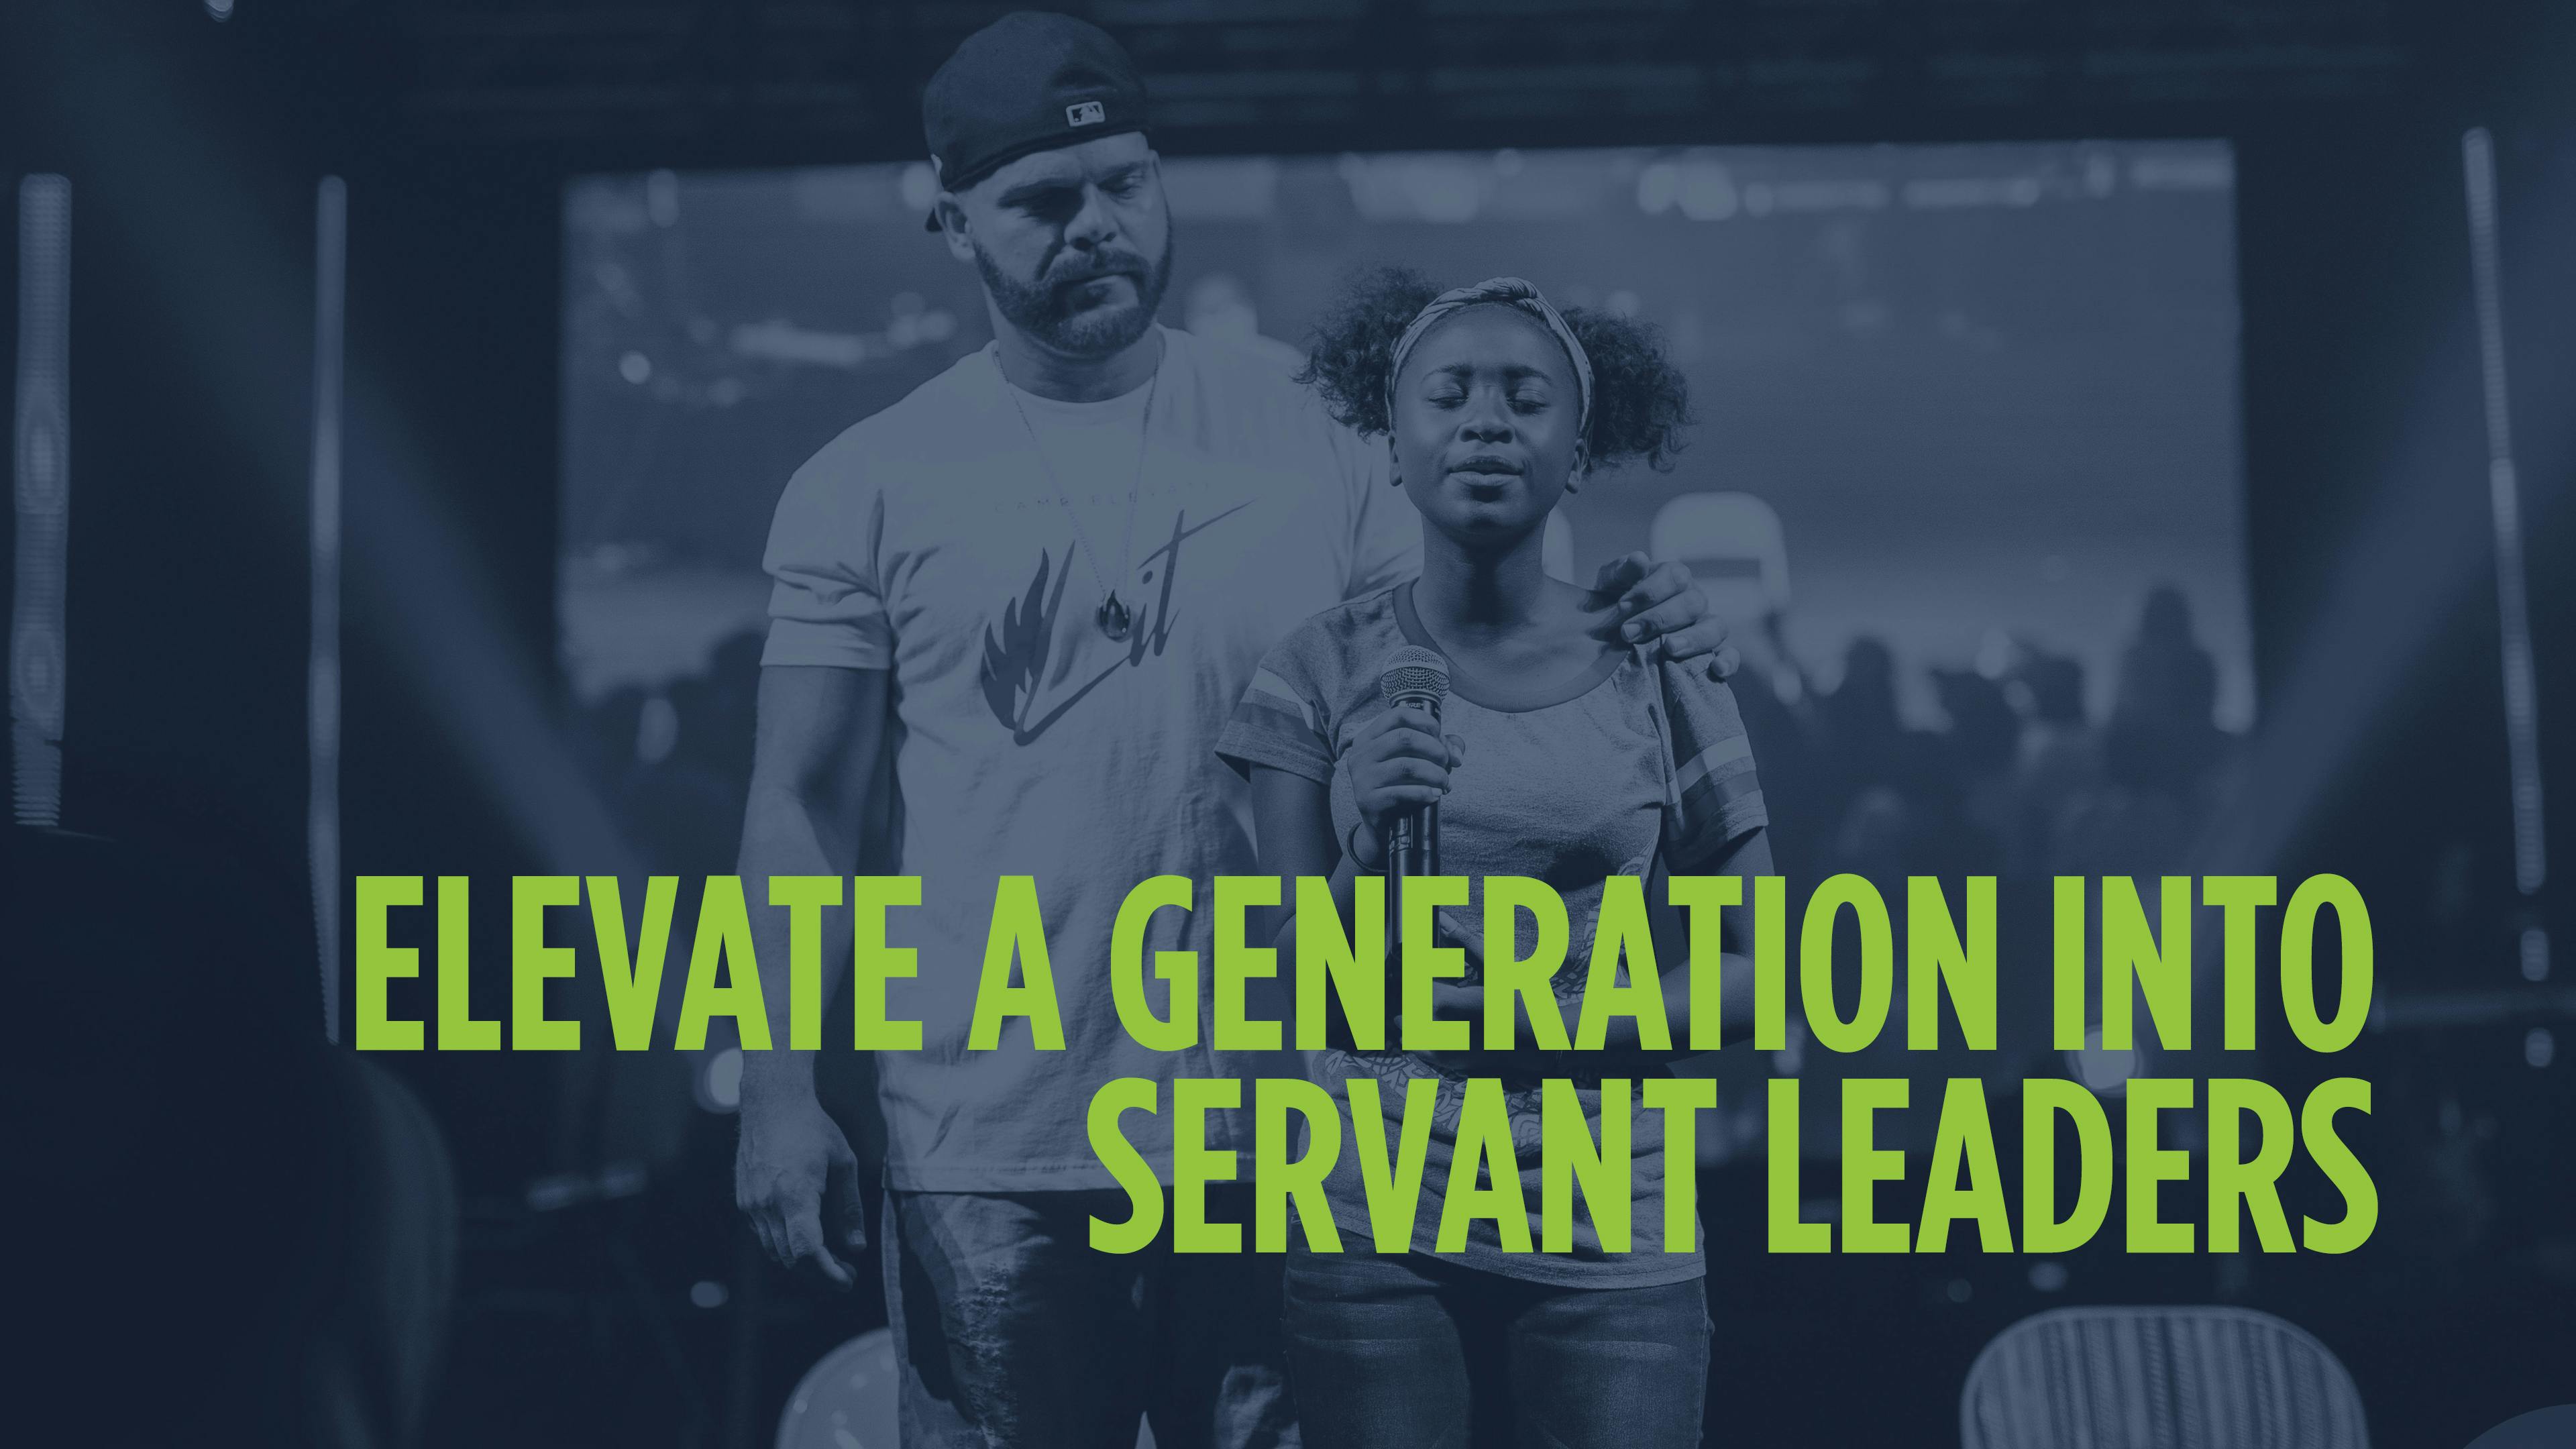 Text "Elevate a generation into servant leaders" in front of a blueish background image of the founder an a girl praying